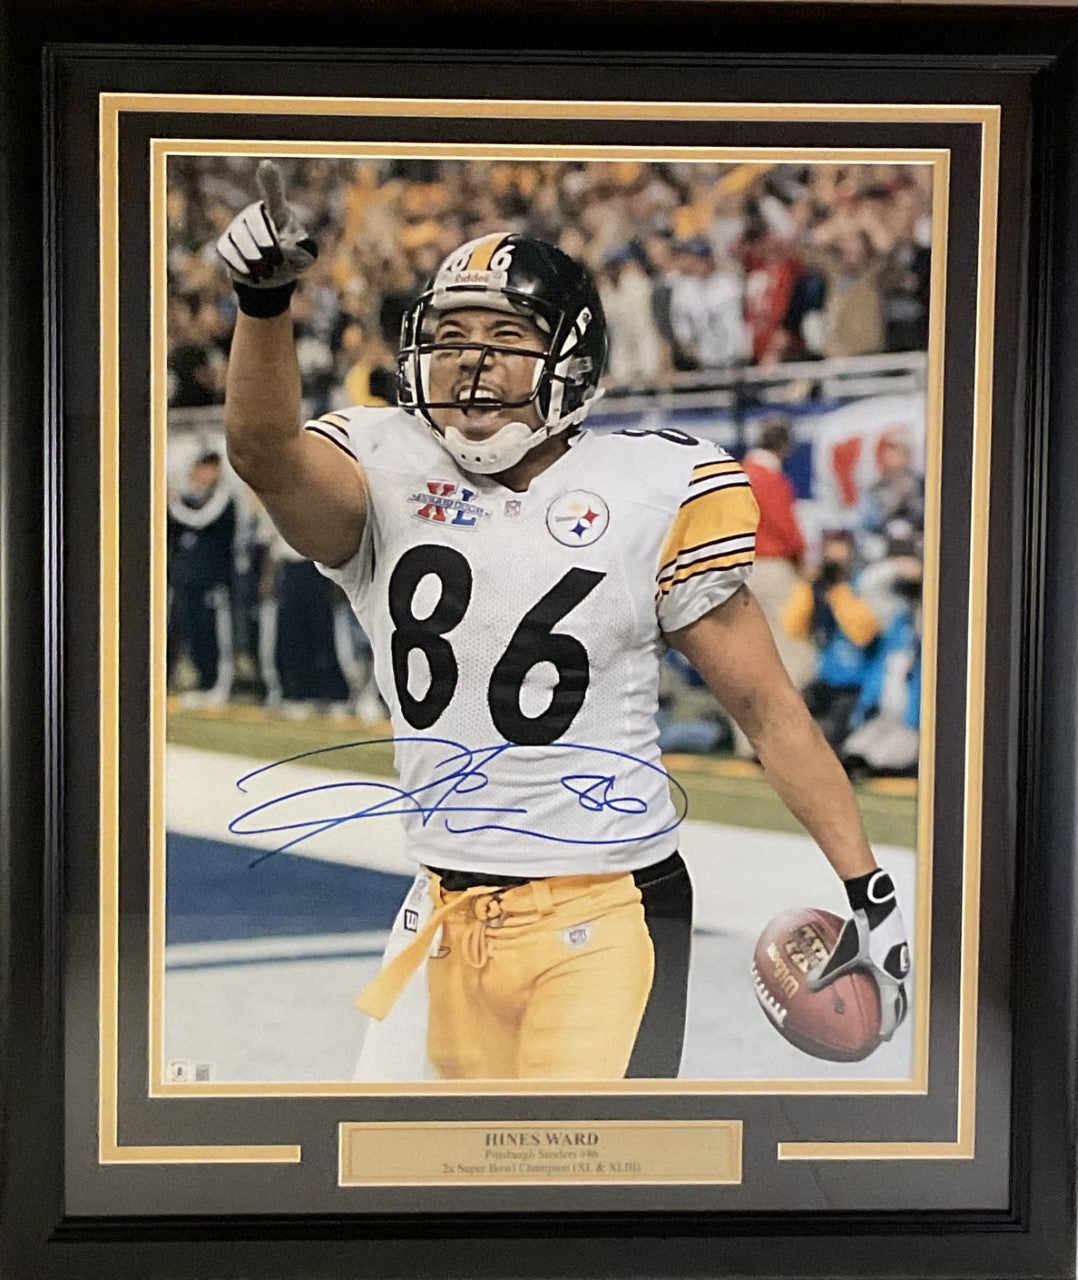 Hines Ward Pittsburgh Steelers Autographed 16x20 Photo Framed